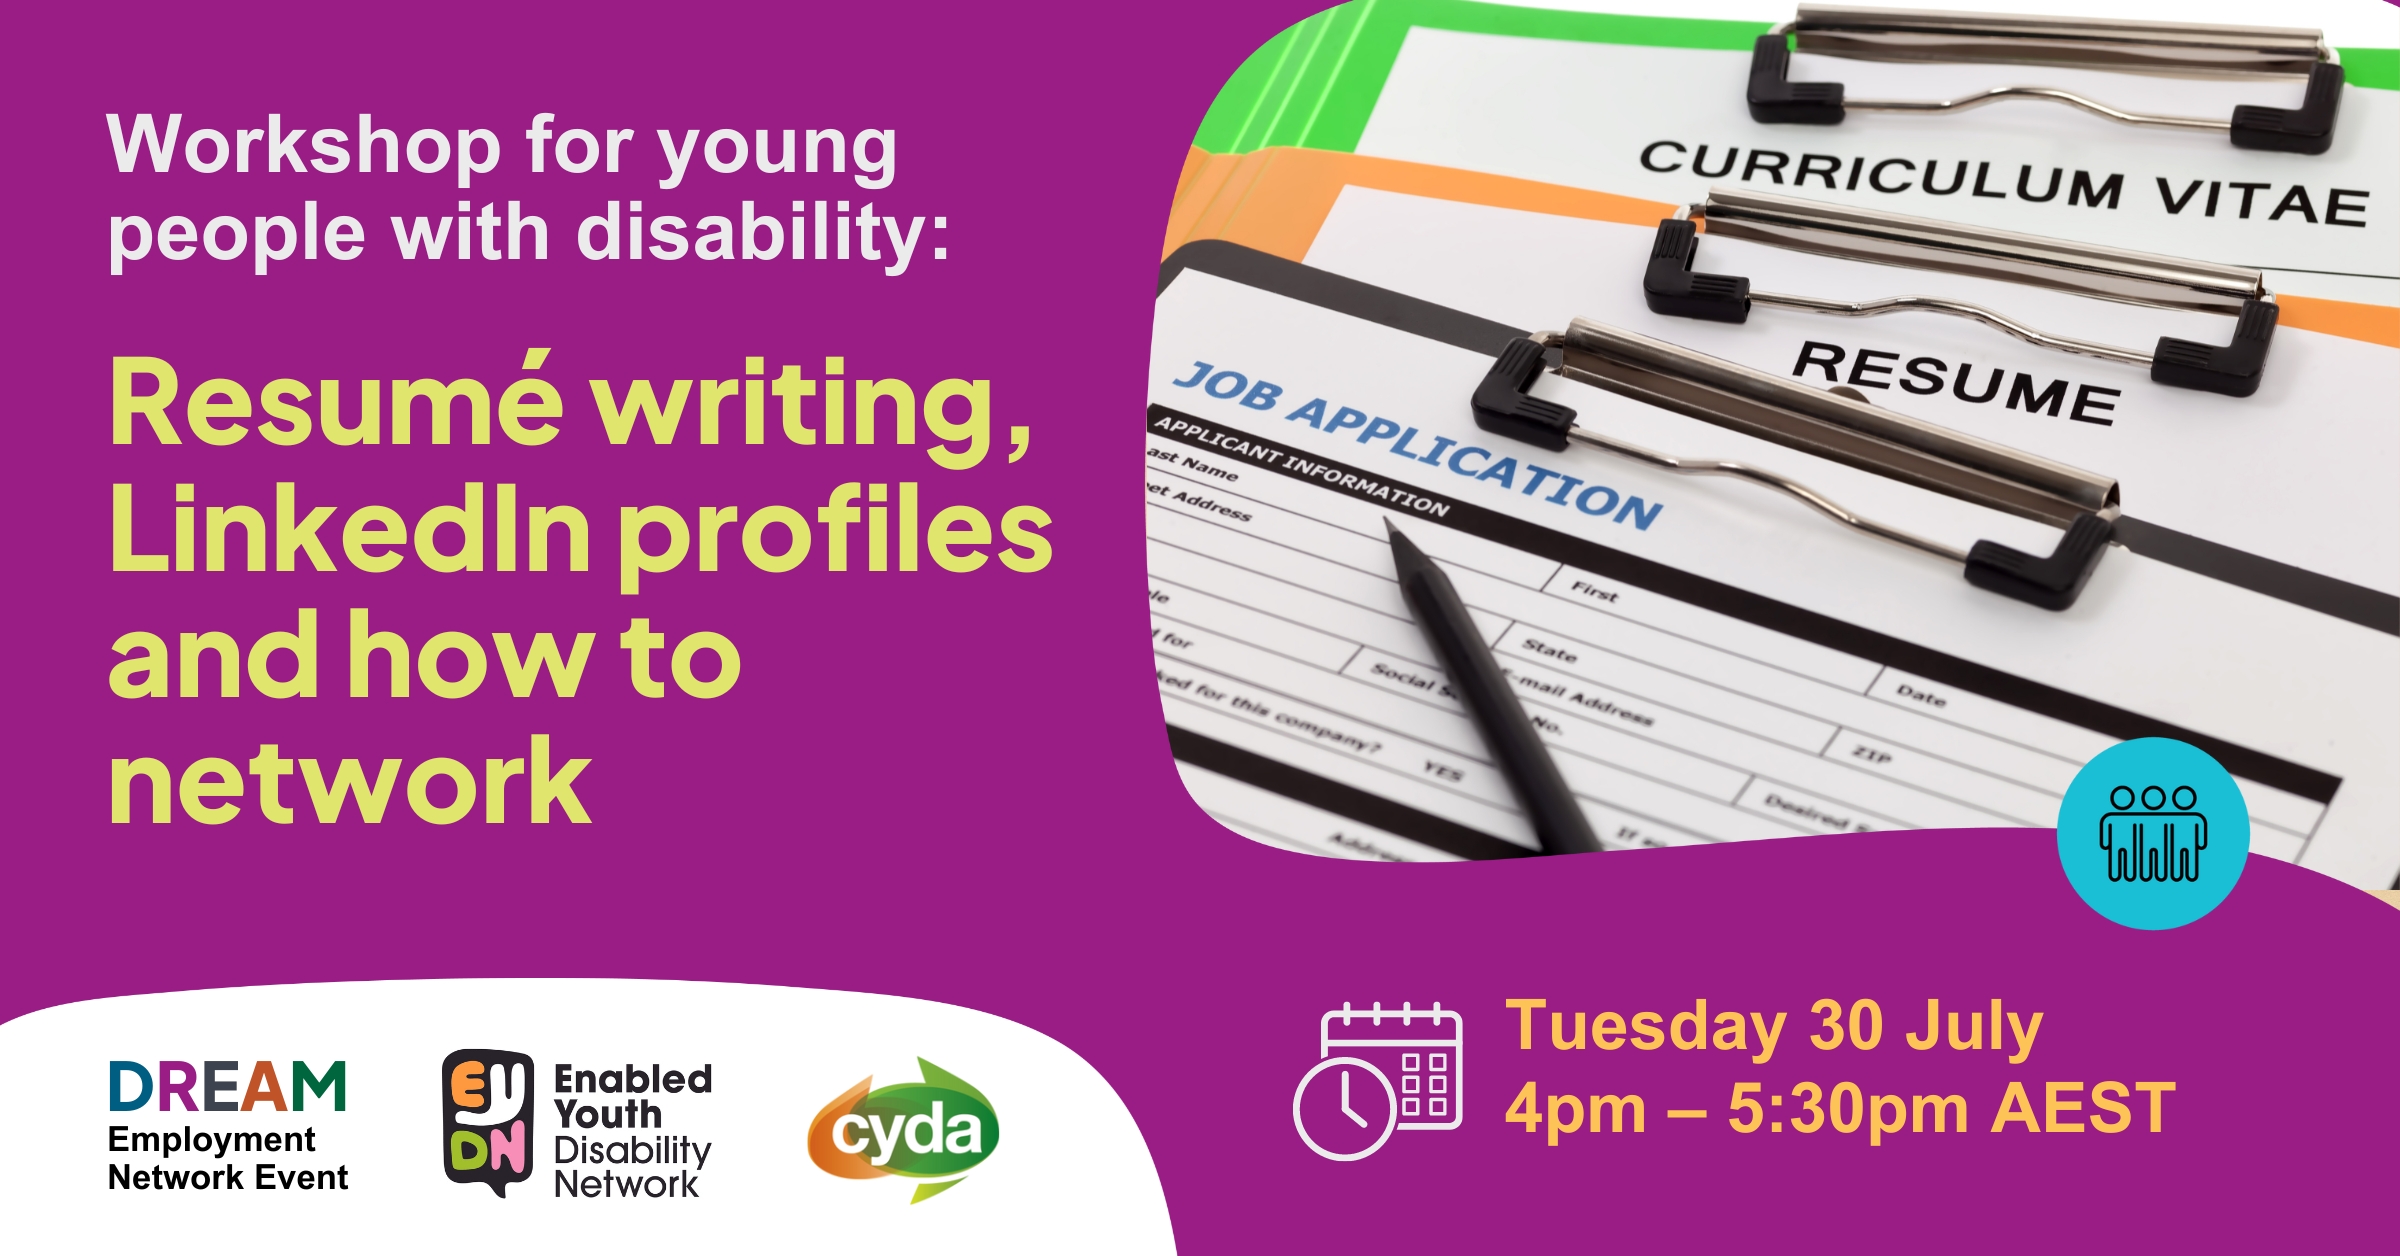 Text on a purple background reads: "Workshop for young people with disability: Resume writing, LinkedIn profiles and how to network. Tuesday 30 July, 4pm – 5:30pm AEST." To the right is a photo of a stack of resumes on coloured clipboards. Below are the logos for the DREAM Employment Network, Enabled Youth Disability Network, and CYDA.